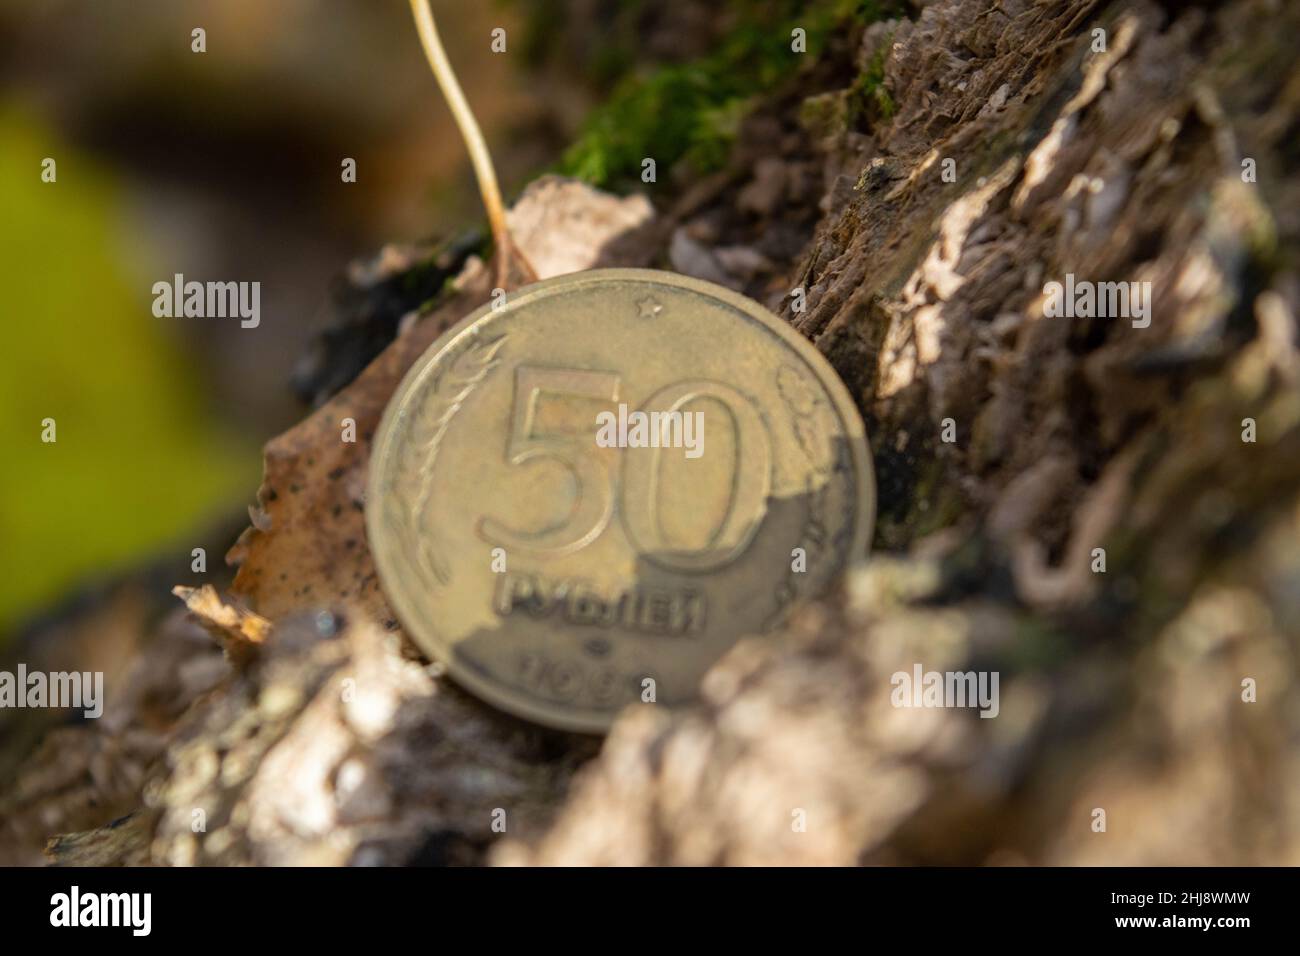 Old coins in the forest in the bark of an old tree Stock Photo